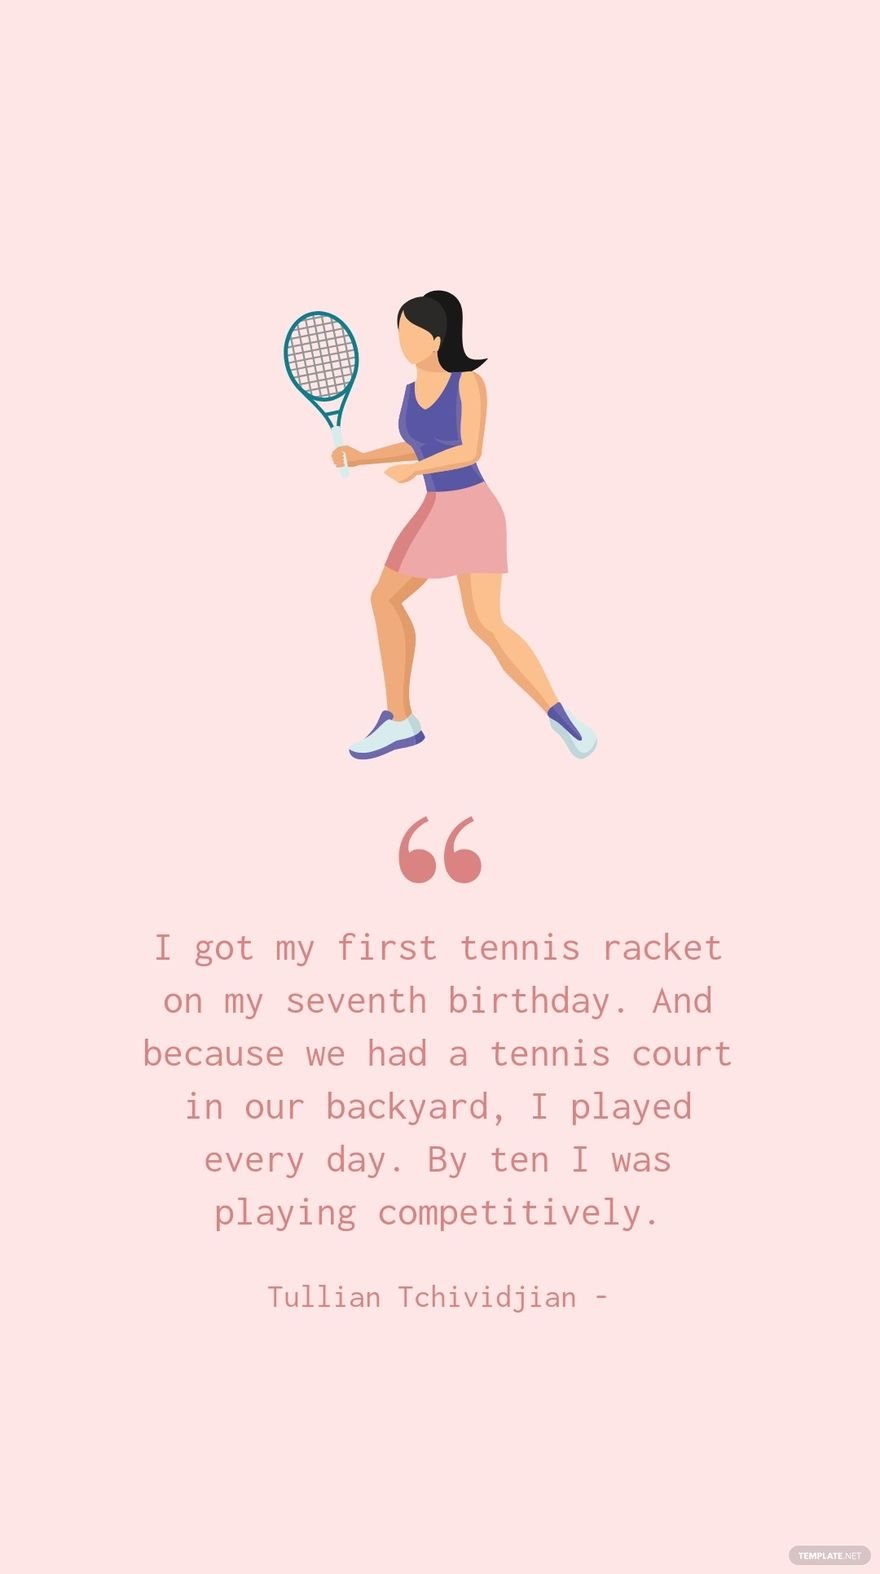 Free Tullian Tchividjian - I got my first tennis racket on my seventh birthday. And because we had a tennis court in our backyard, I played every day. By ten I was playing competitively.